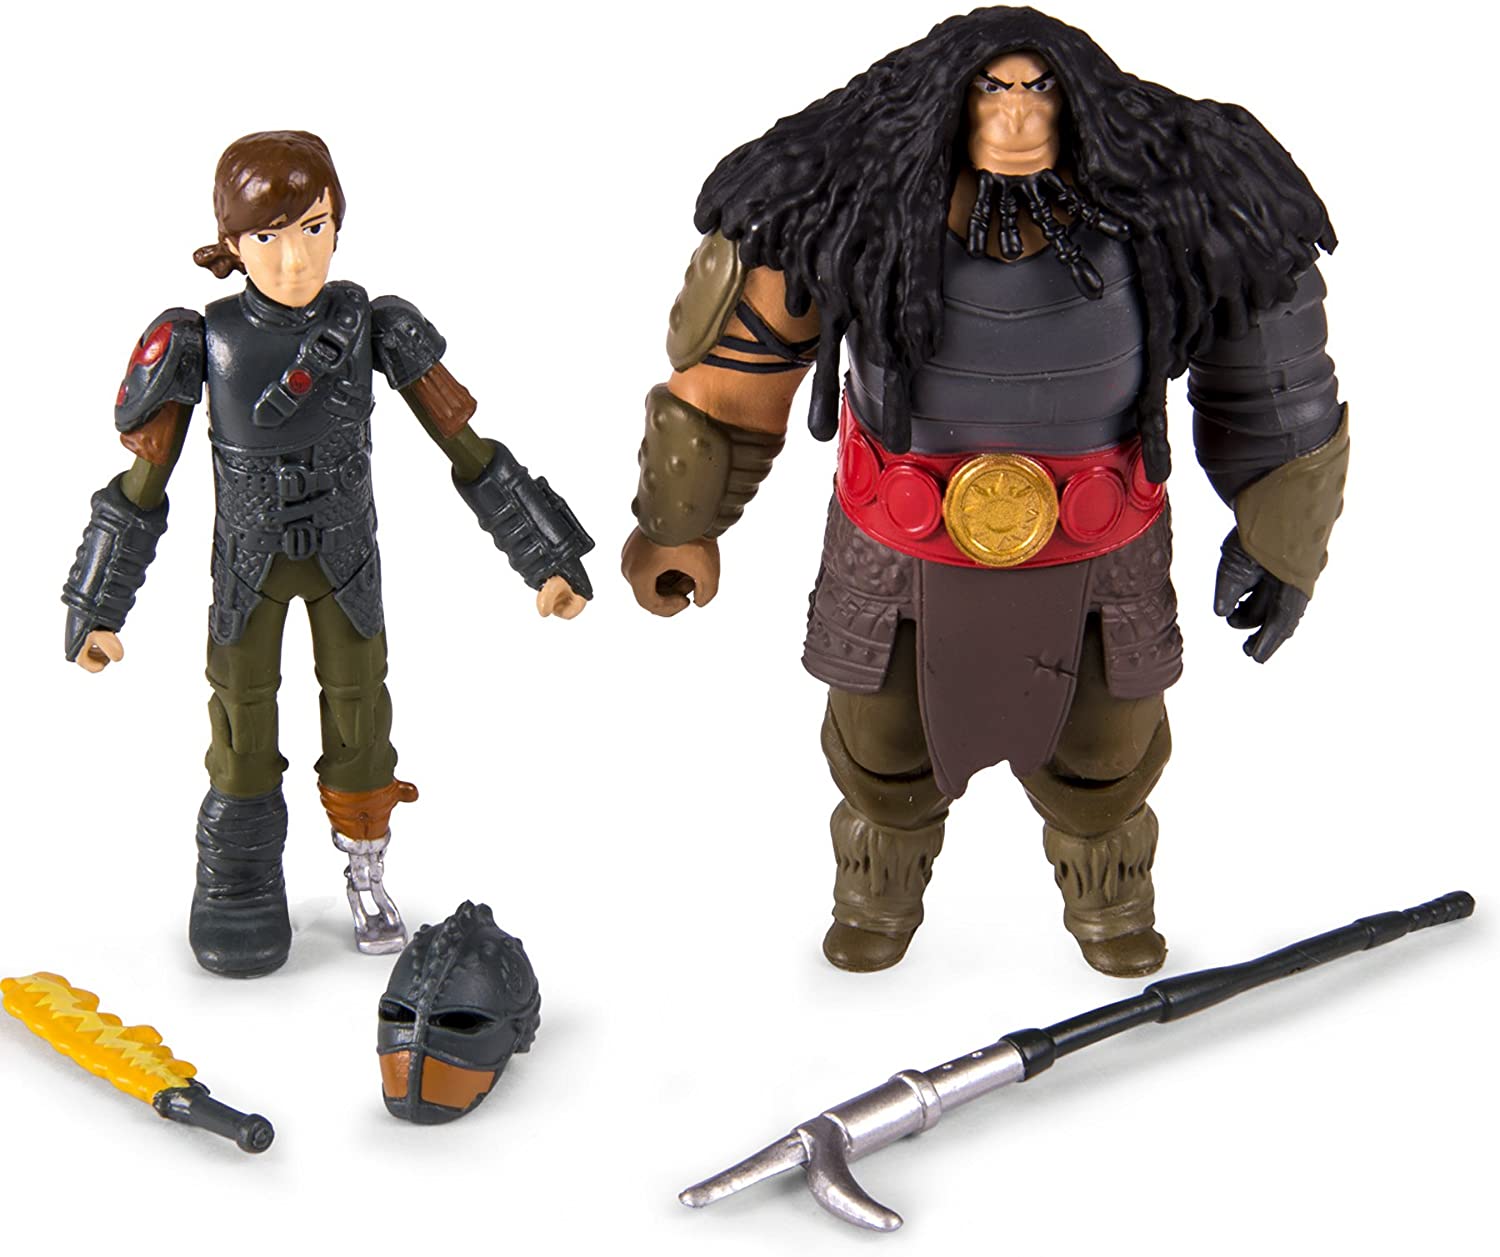 How To Train Your Dragon 2 Viking Warriors - Hiccup Vs. Drago Figures